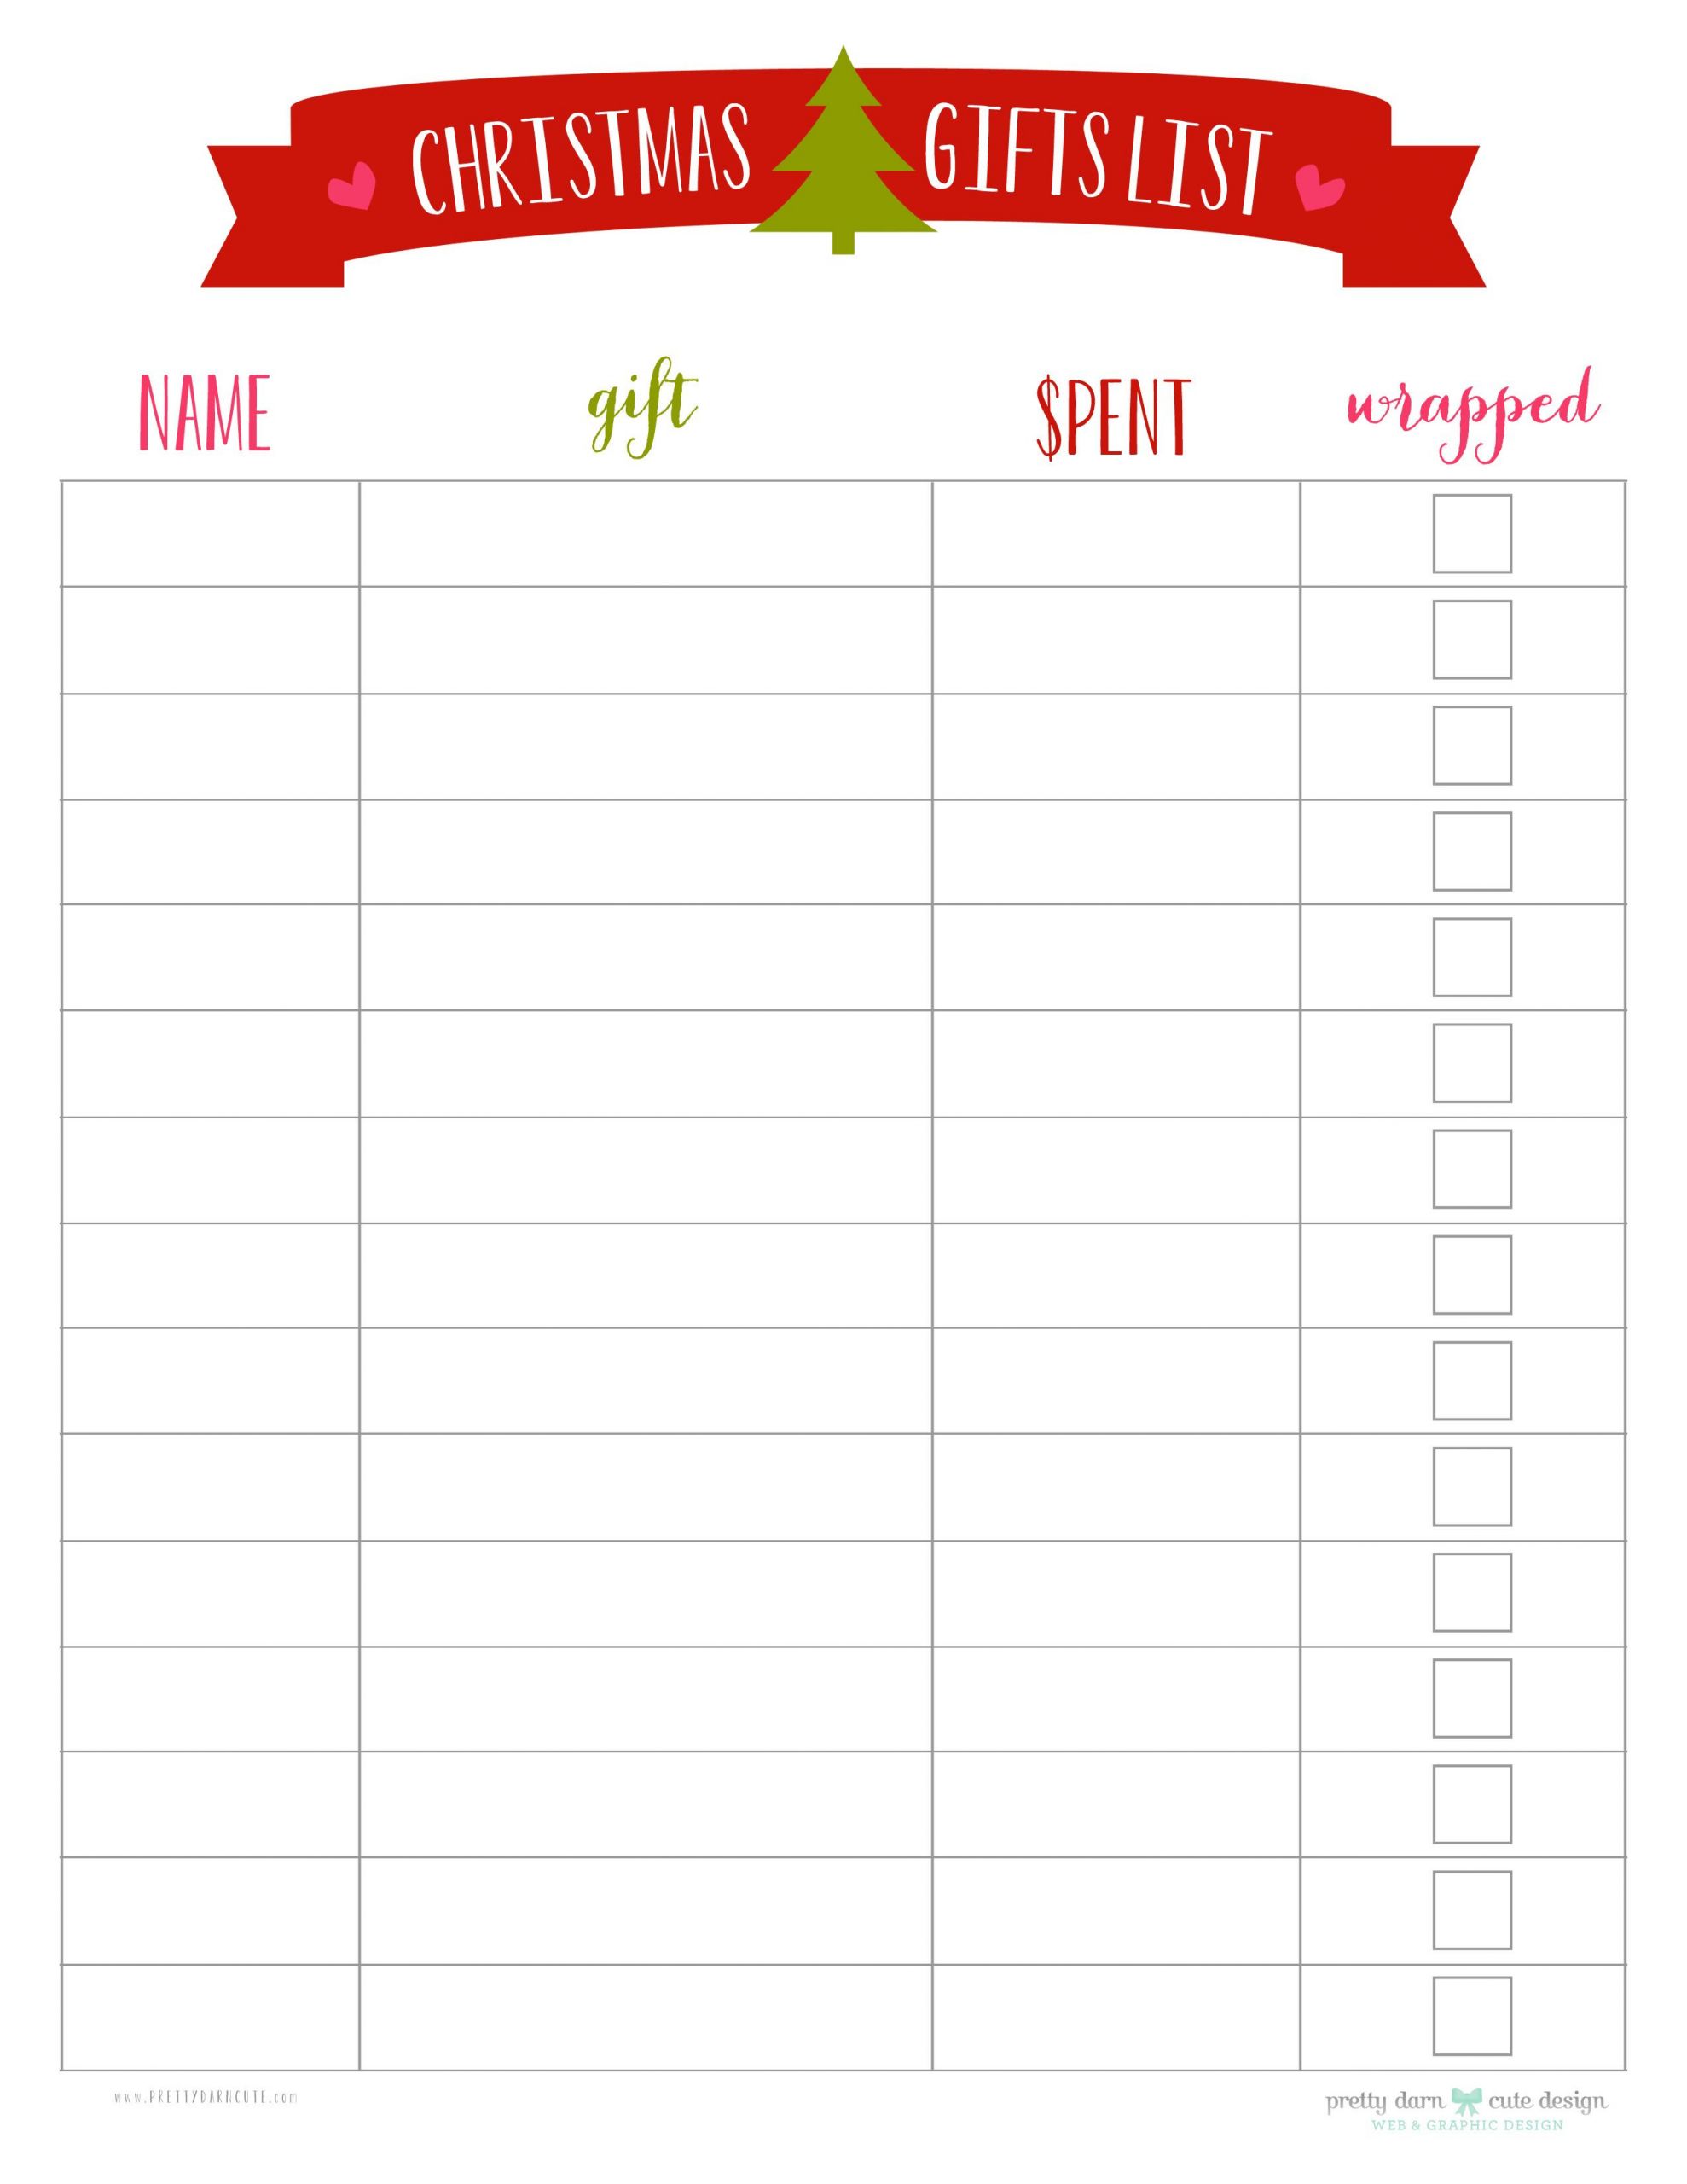 Christmas Gift List Template
 Christmas list printable in case I decide to feel